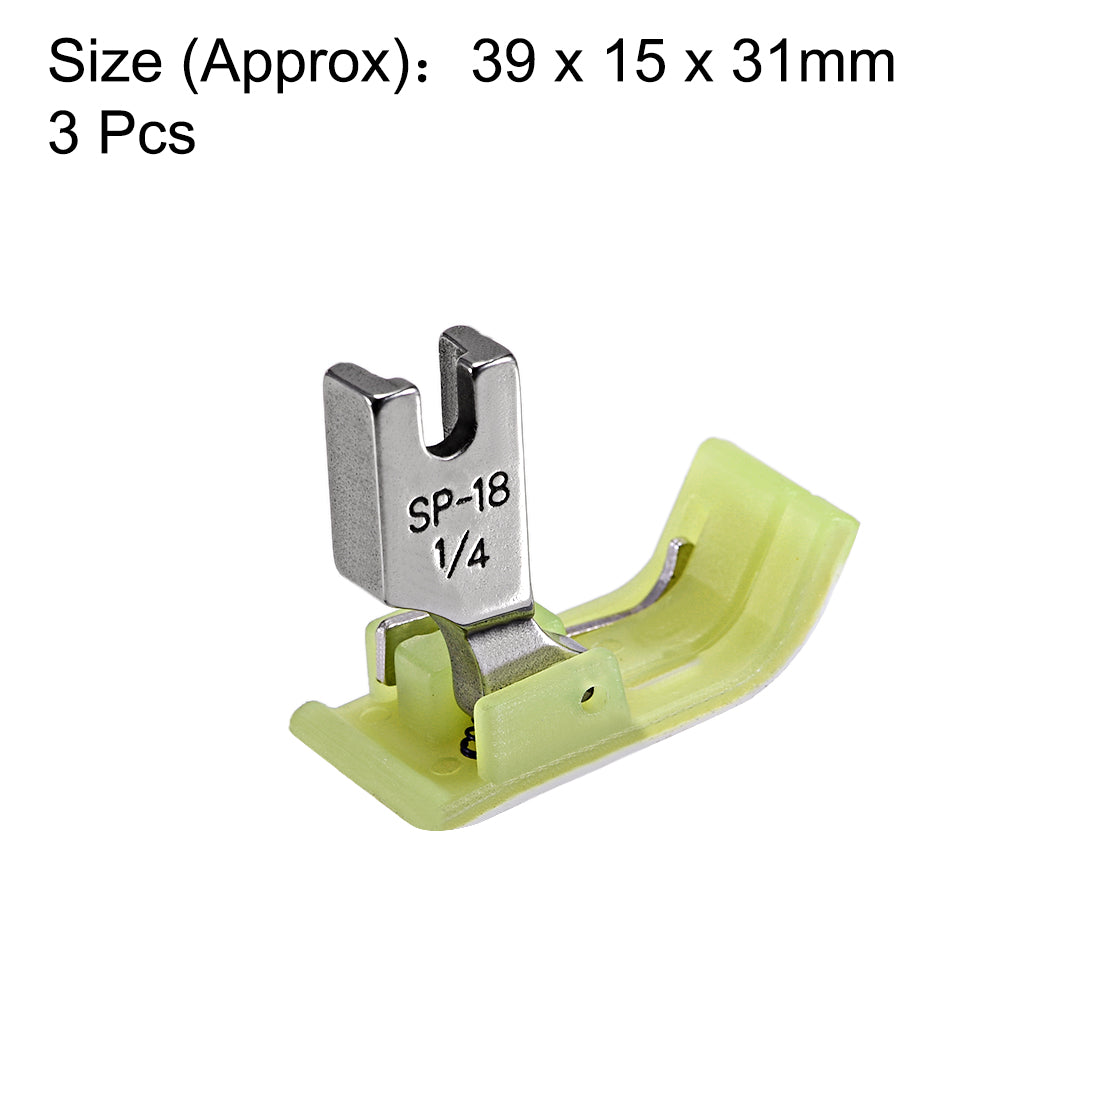 uxcell Uxcell #SP-18 Industrial Sewing Machine Hinged Presser Foot with Right Guide 1/4" (6mm) Green 3pcs